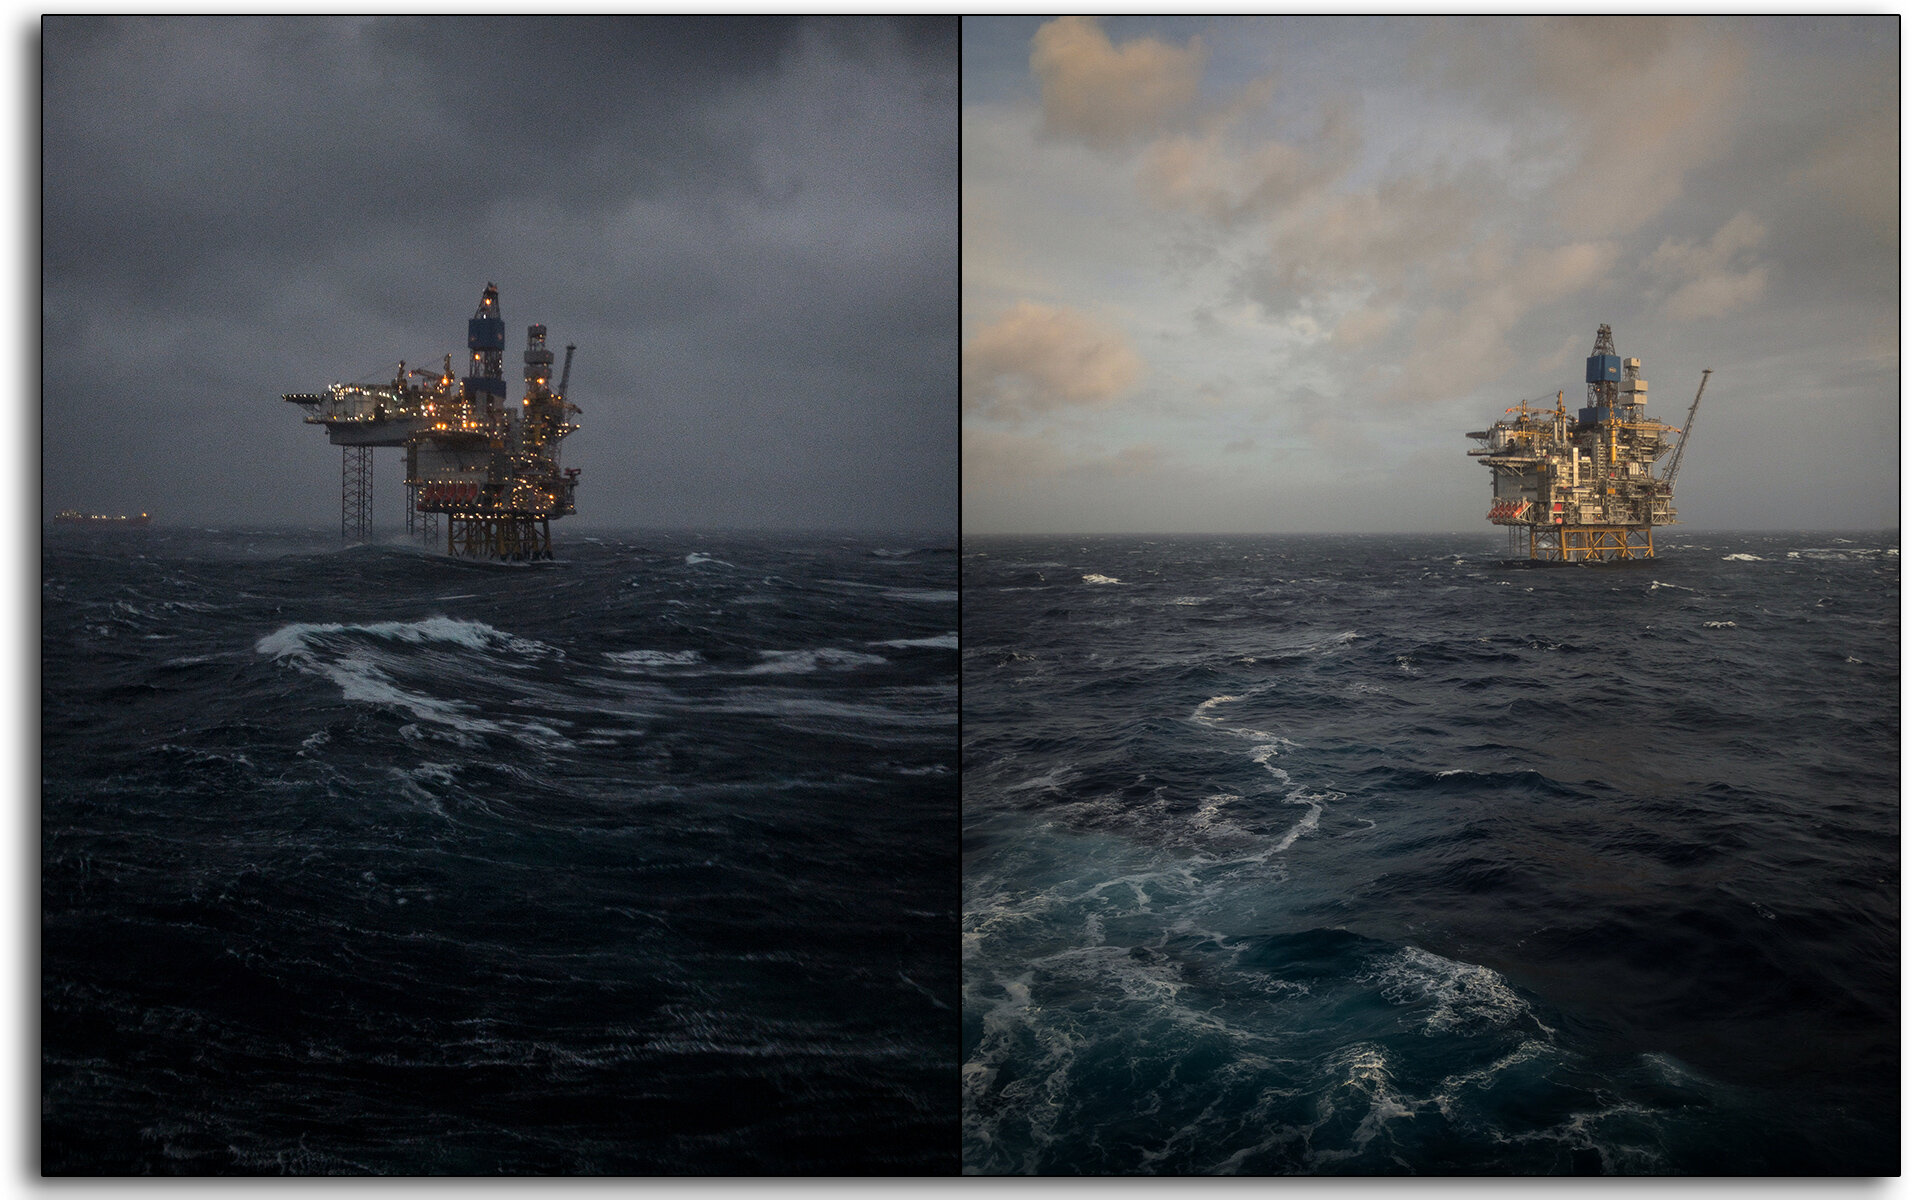 Stormy weather, rough seas, Oil and gas, oil rig, Scotland, industry, industrial, Mariner, workers, construction, equinor, mariner, oil rig.jpg